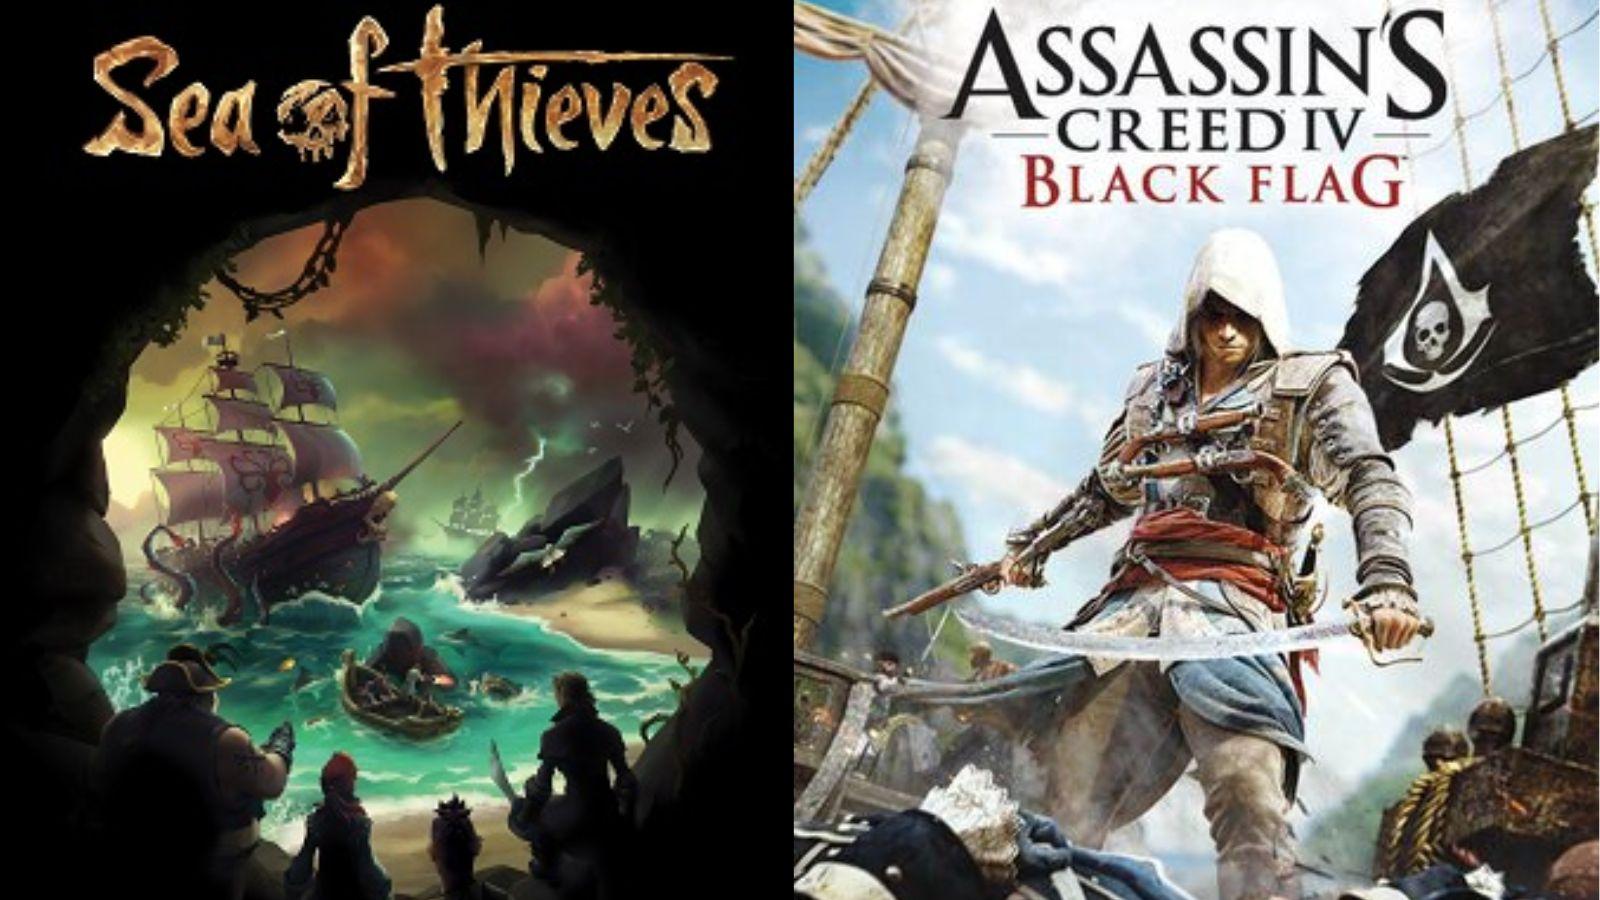 Sea of Thieves and Black Flag promotional images